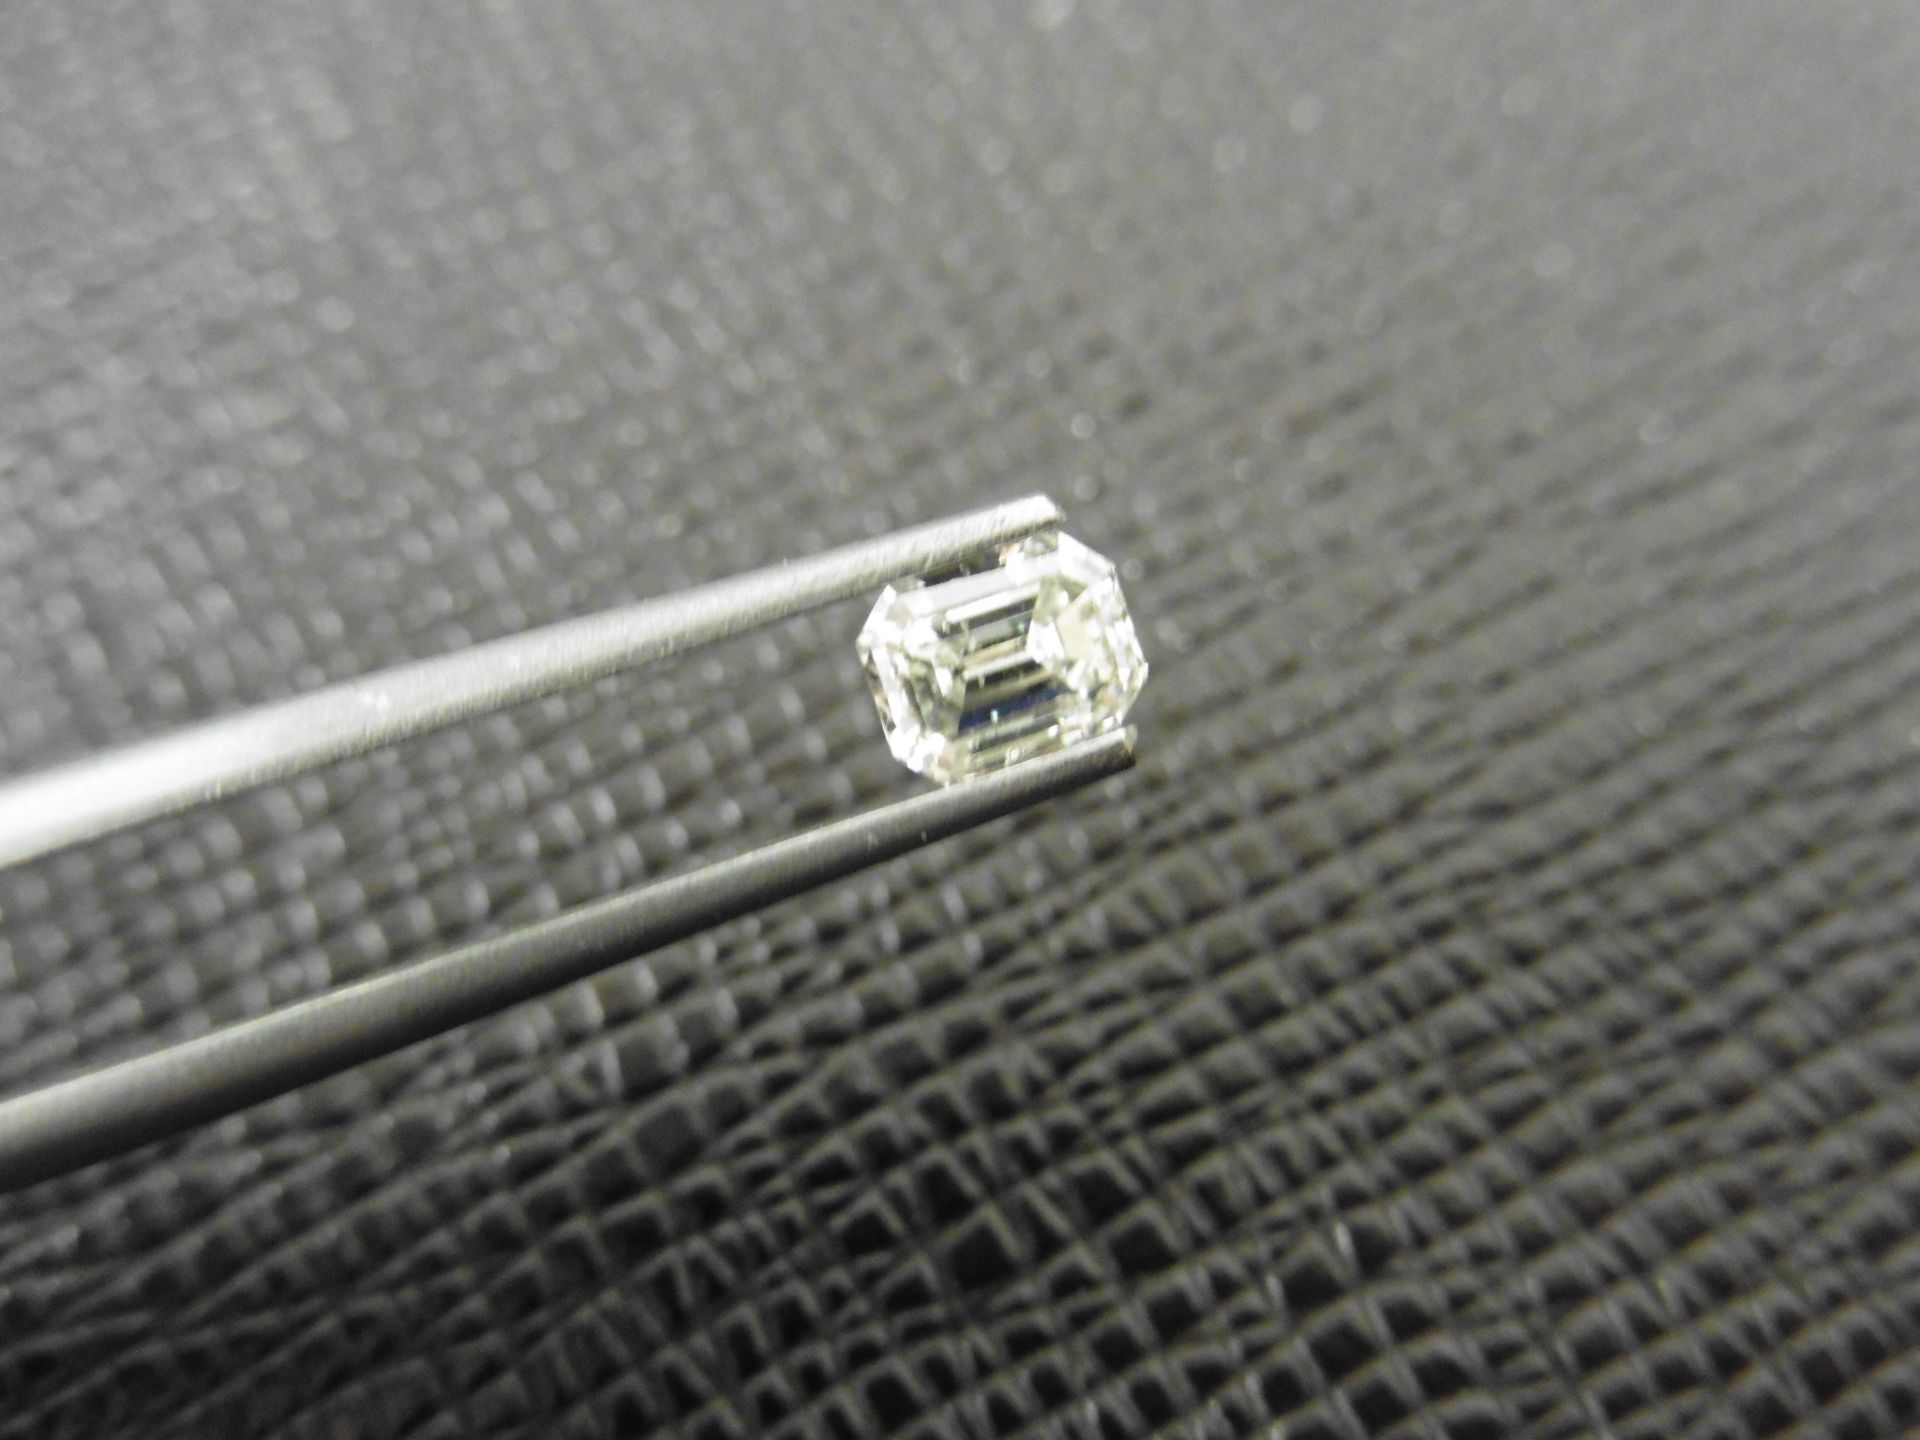 0.61ct natural emerald cut diamond. I colour and SI2 clarity. No certification but can be done